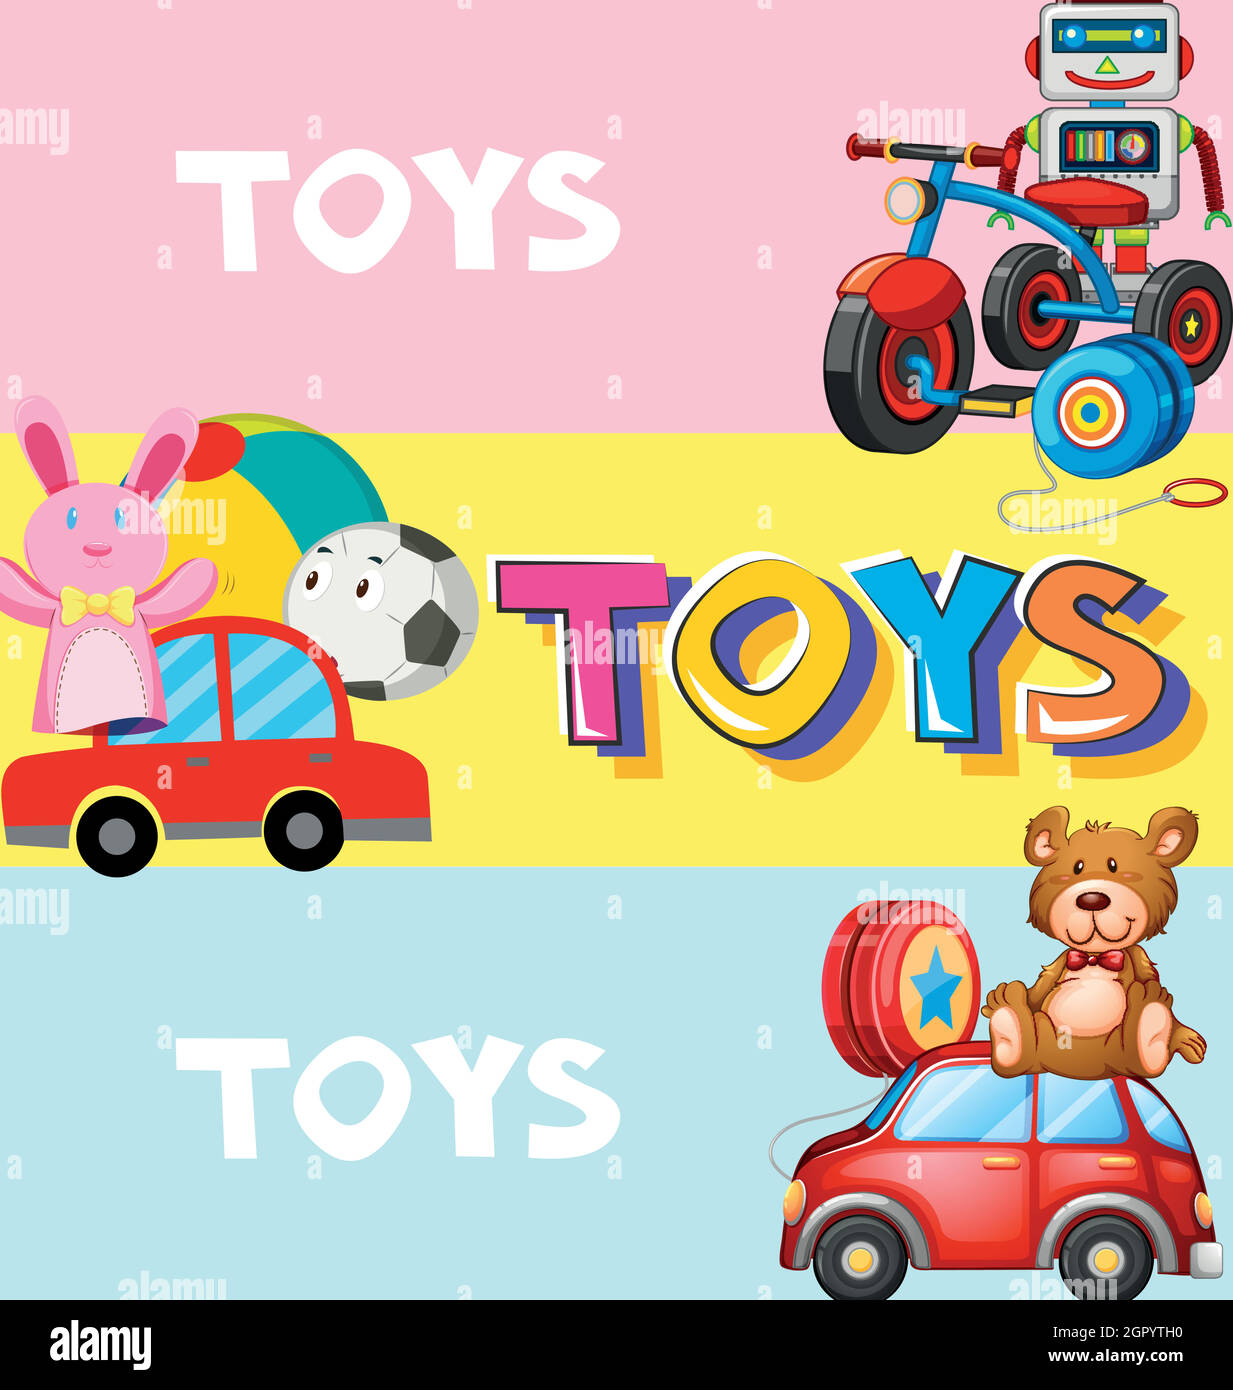 Poster design with toys in background Stock Vector